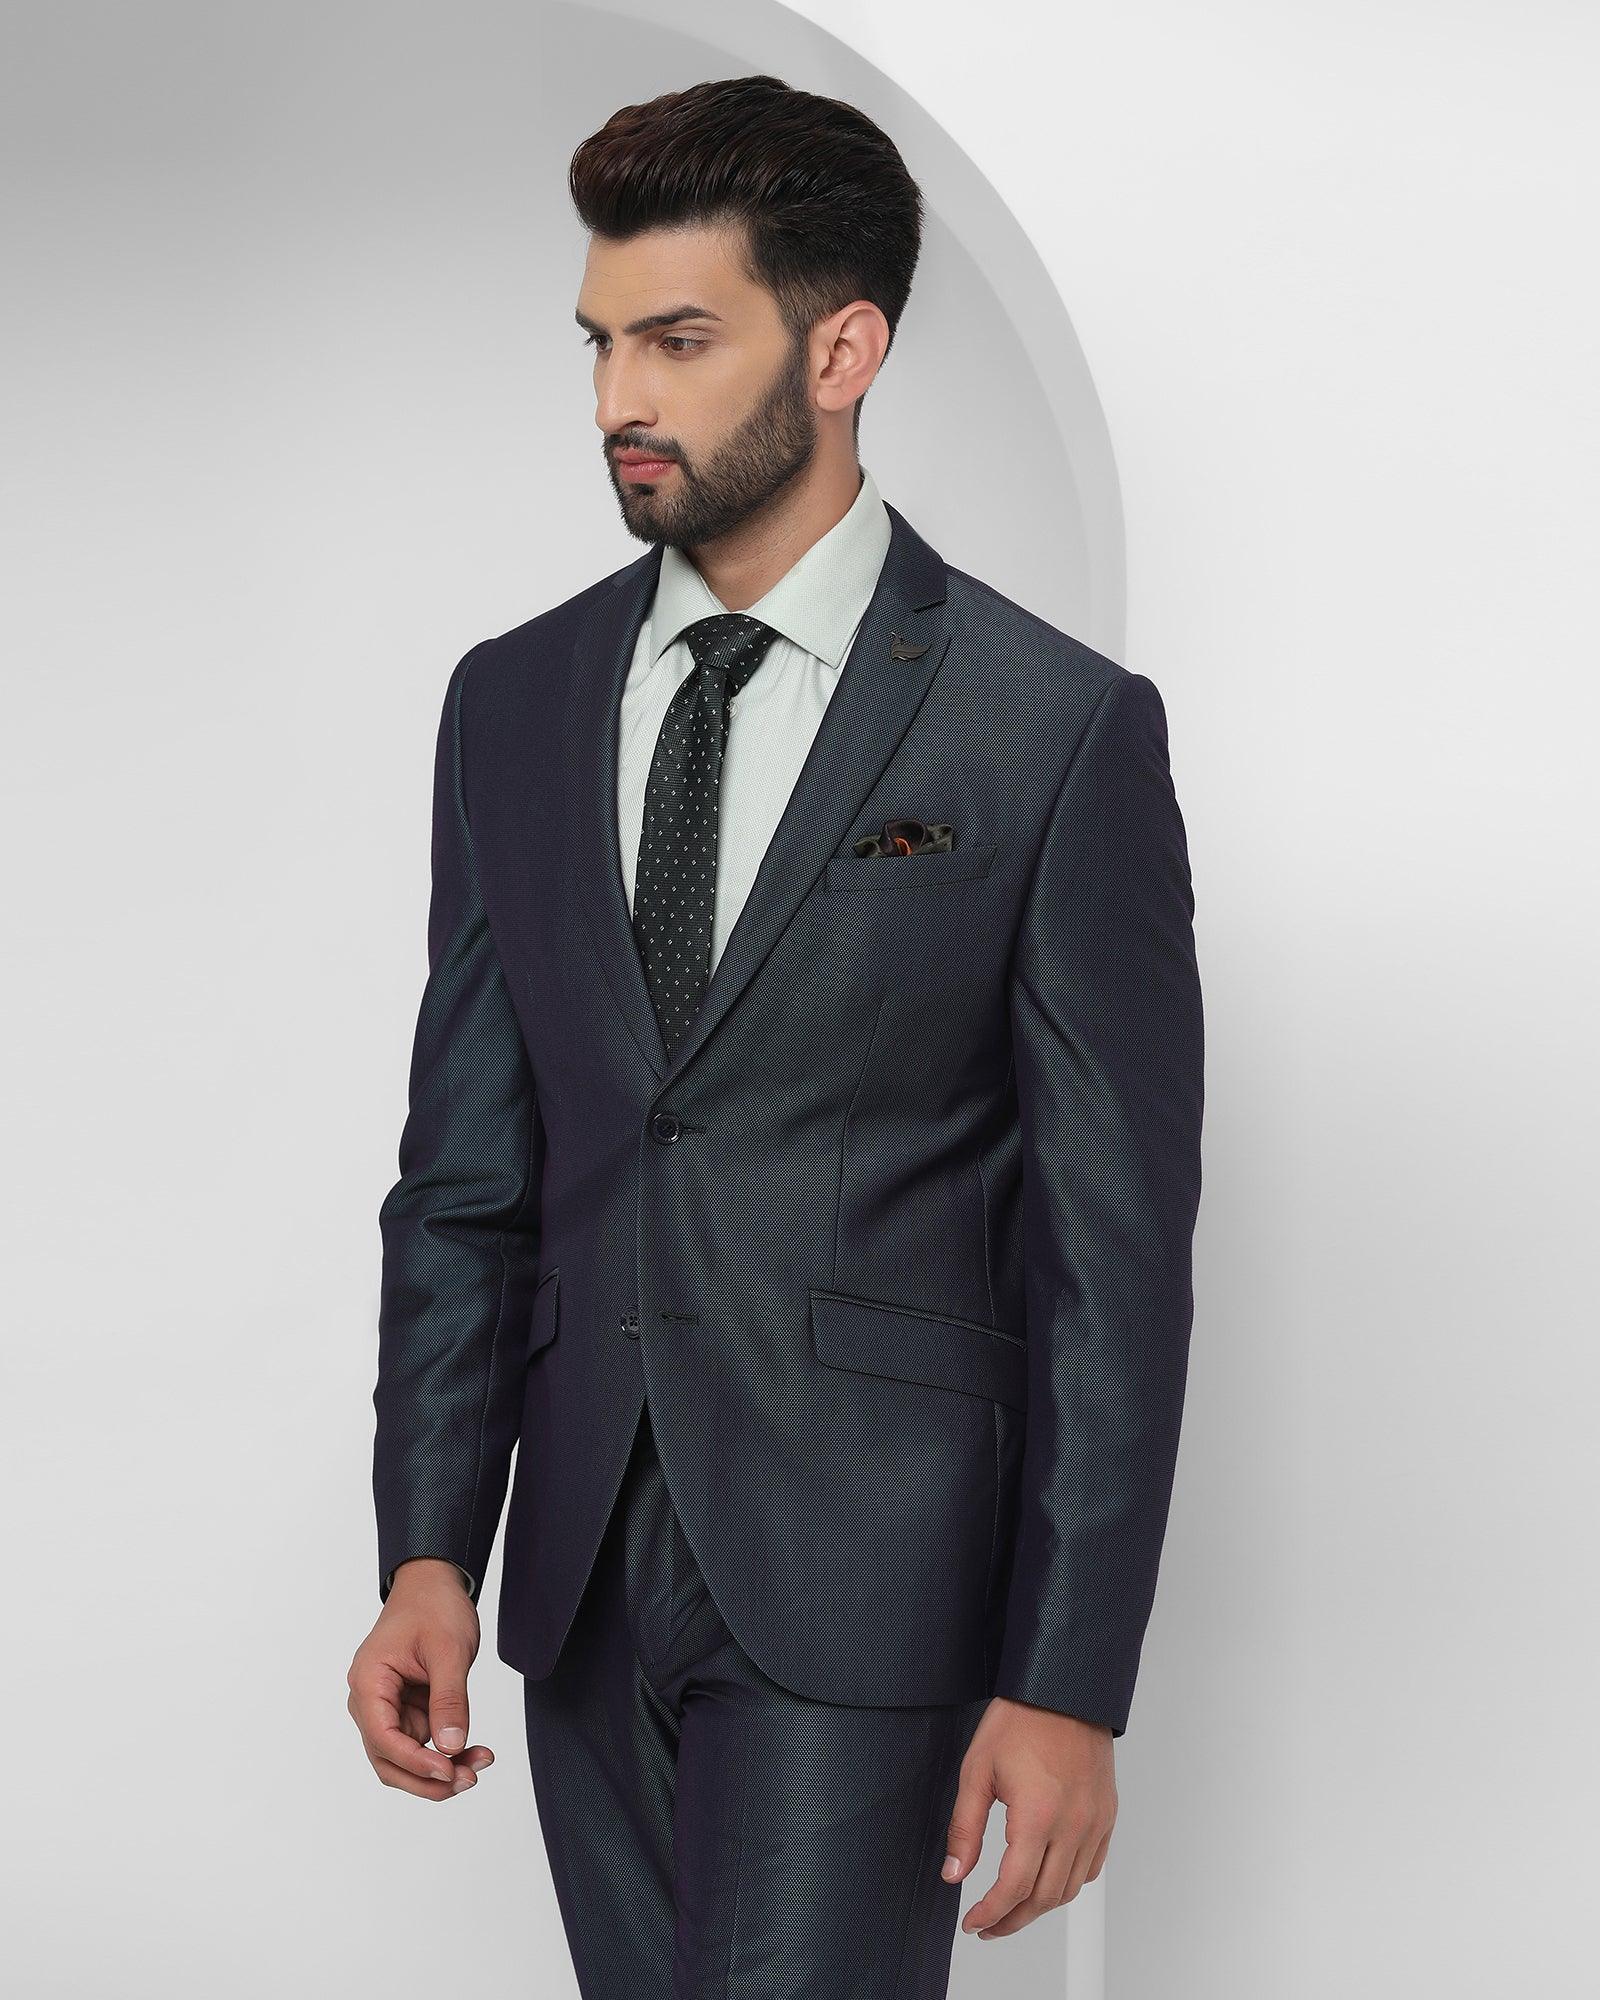 Two Piece Teal Textured Formal Suit - Therin